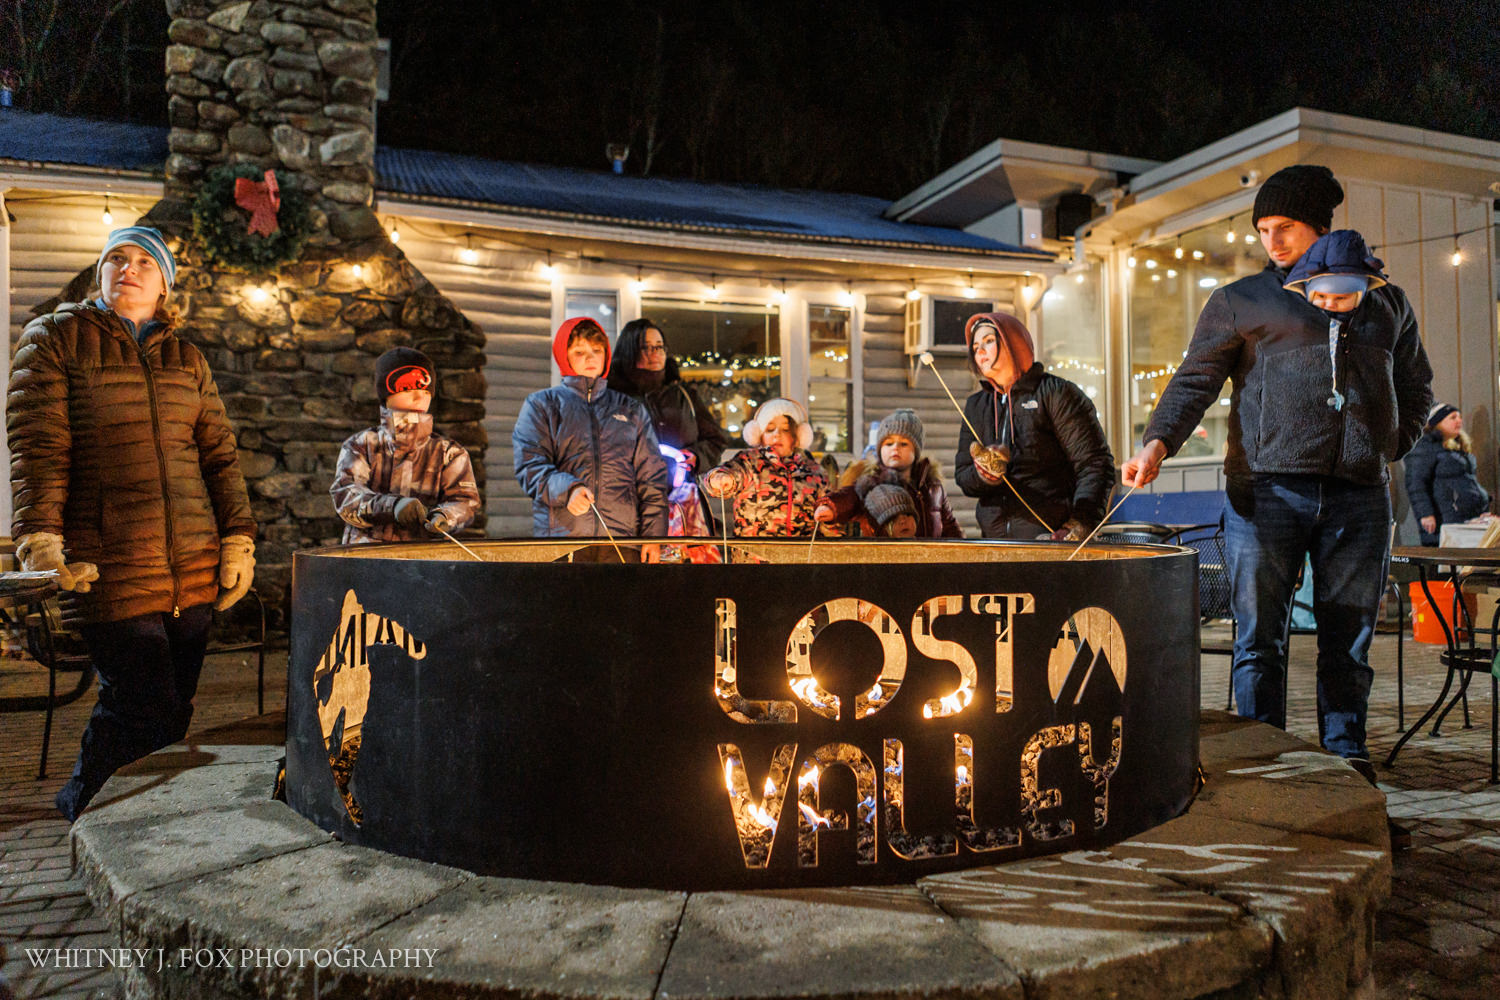 324 winter kids welcome to winter 2022 lost valley auburn maine documentary event photographer whitney j fox 3252 w